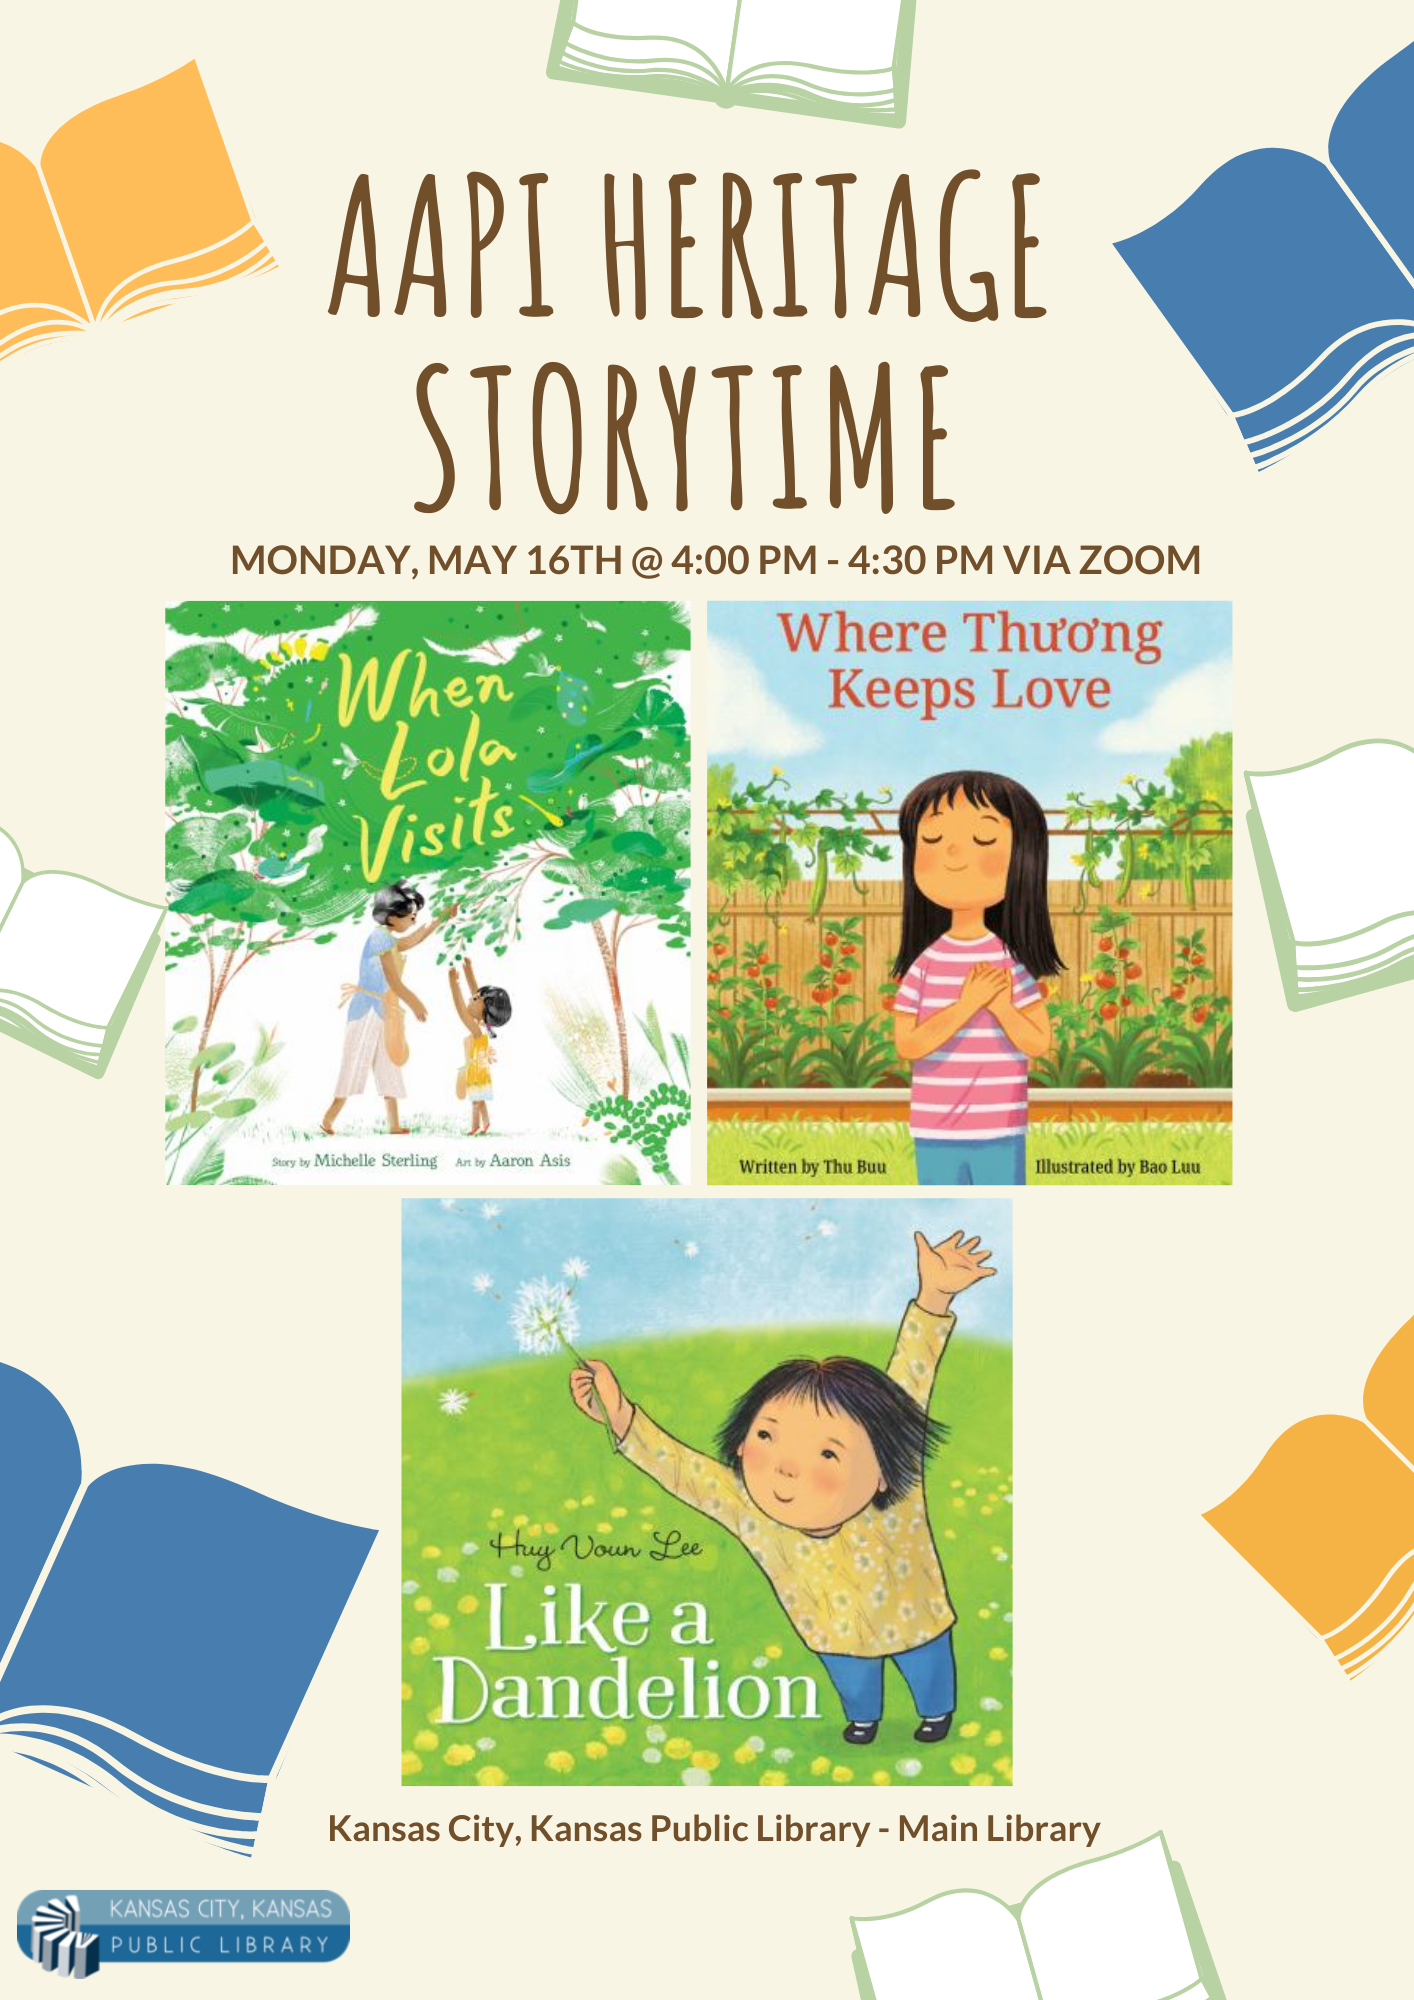 AAPI Heritage Storytime. Books being read include: When Lola Visits, Where Thu'o'ng Keeps Love, and Like a Dandelion.